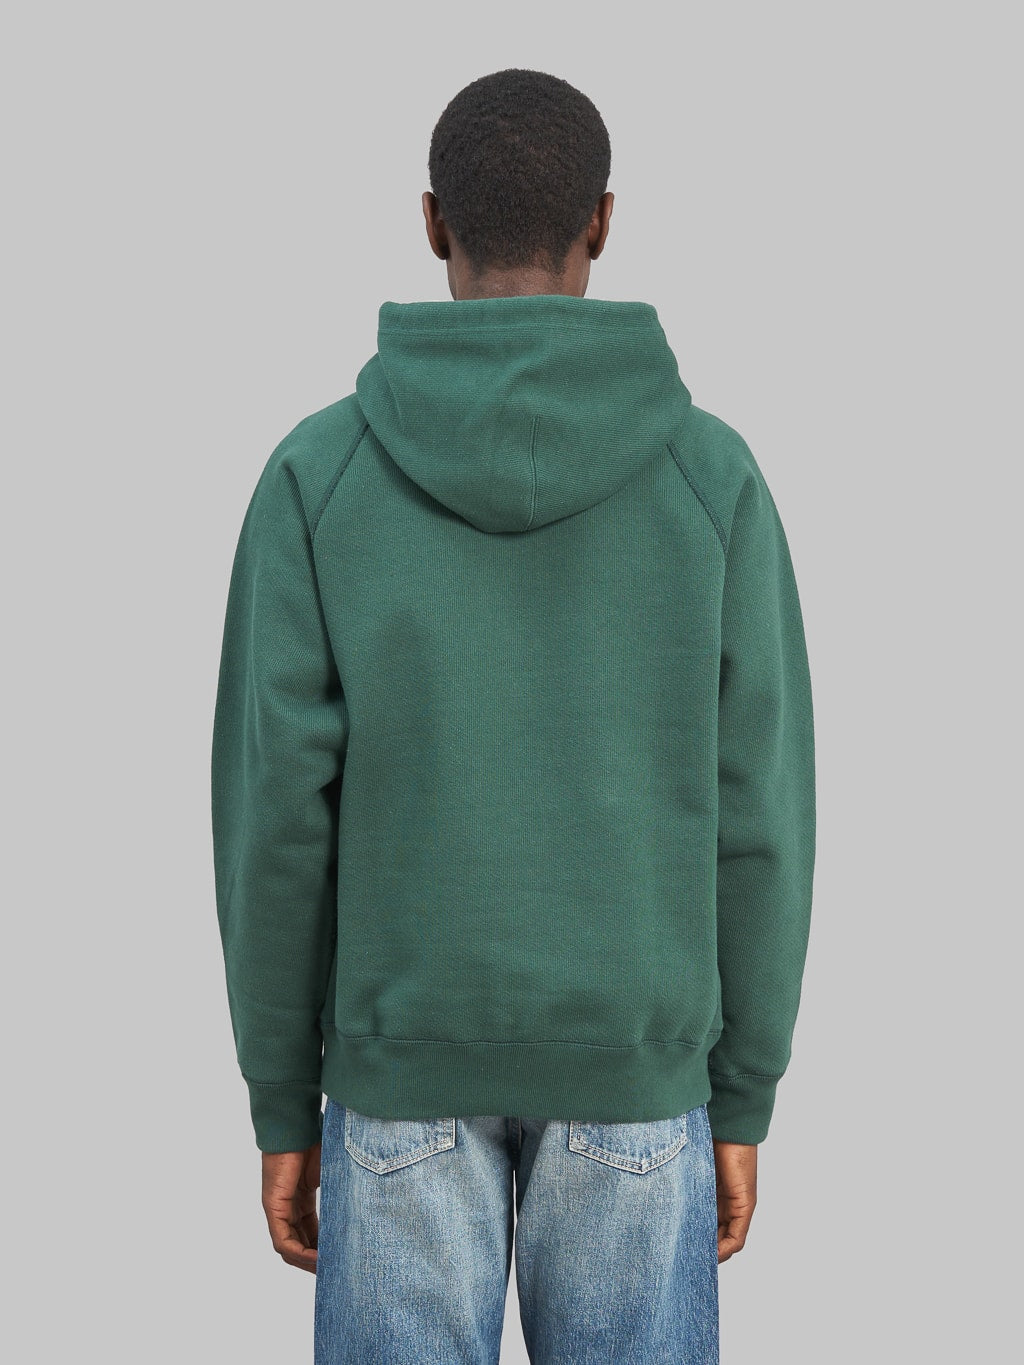 Wonder Looper Pullover Hoodie Double Heavyweight French Terry green athletic back fit